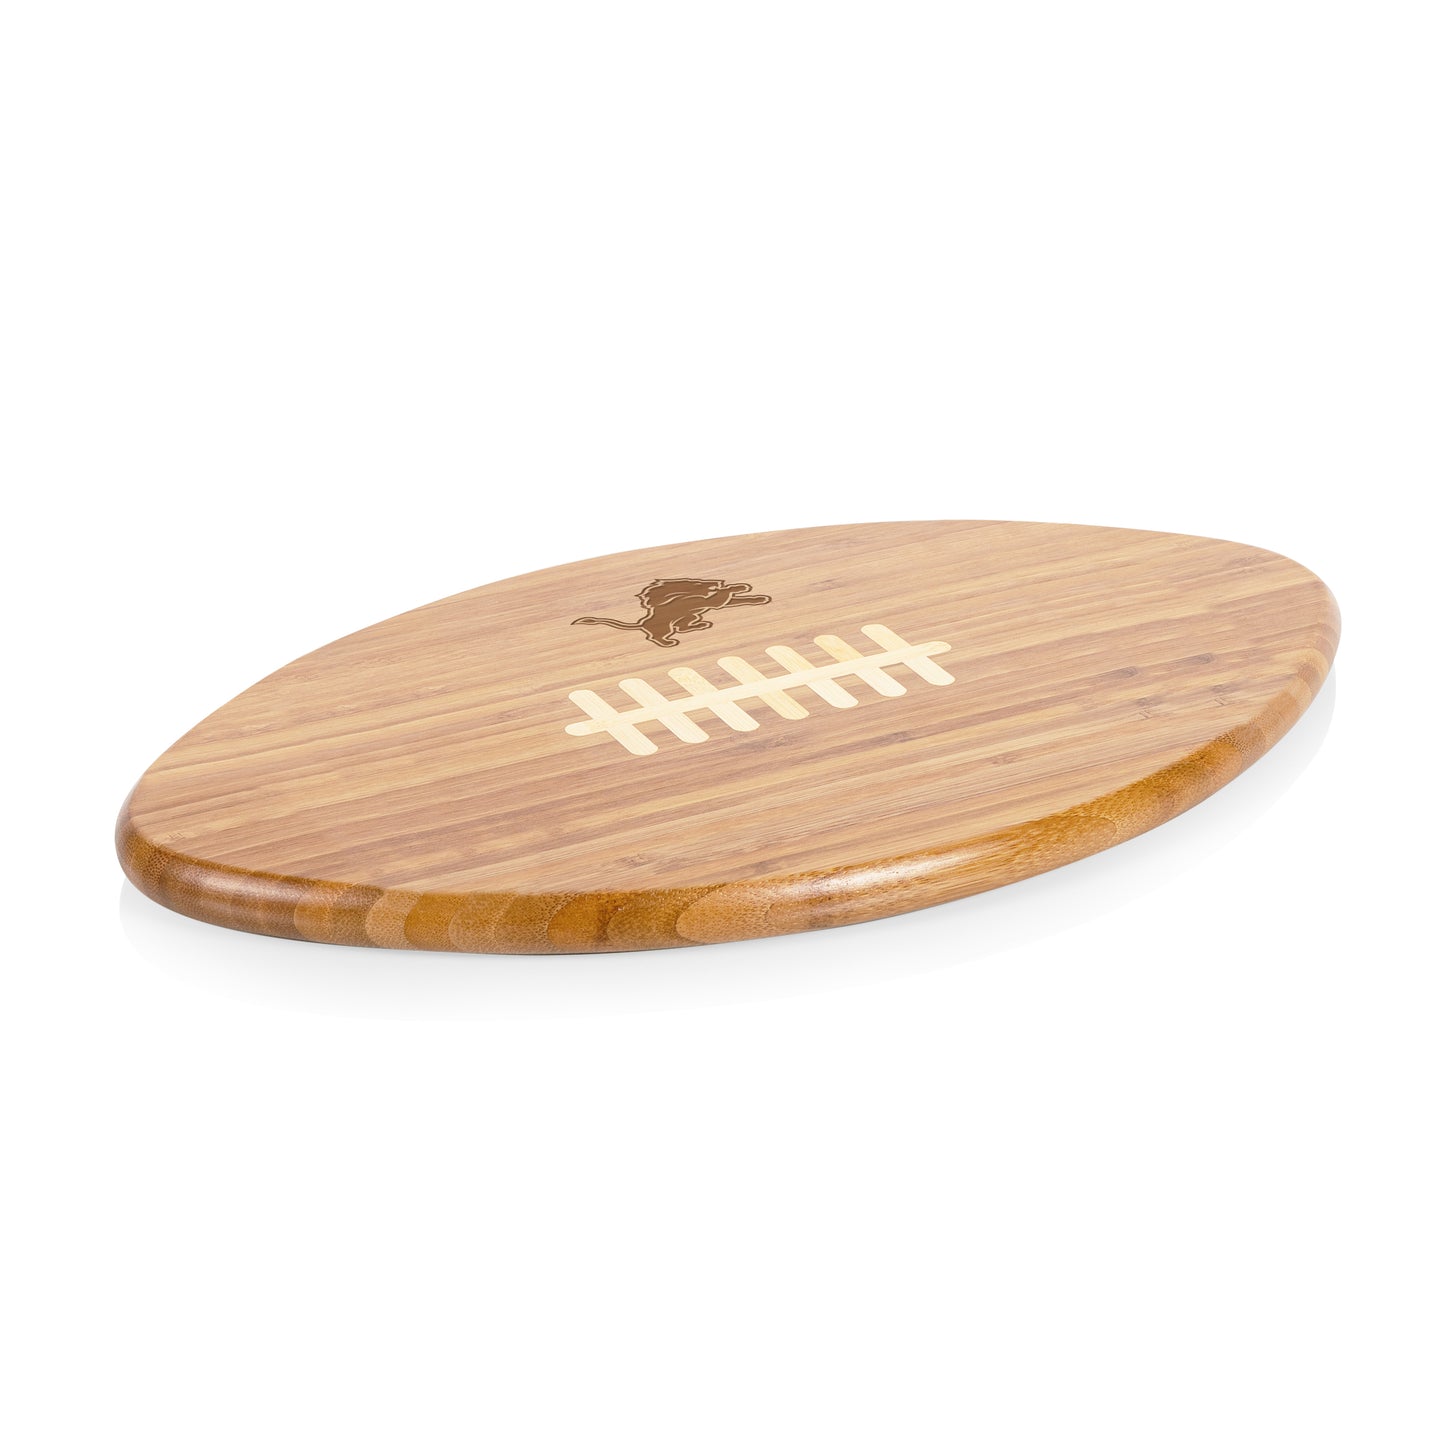 Detroit Lions - Touchdown! Football Cutting Board & Serving Tray